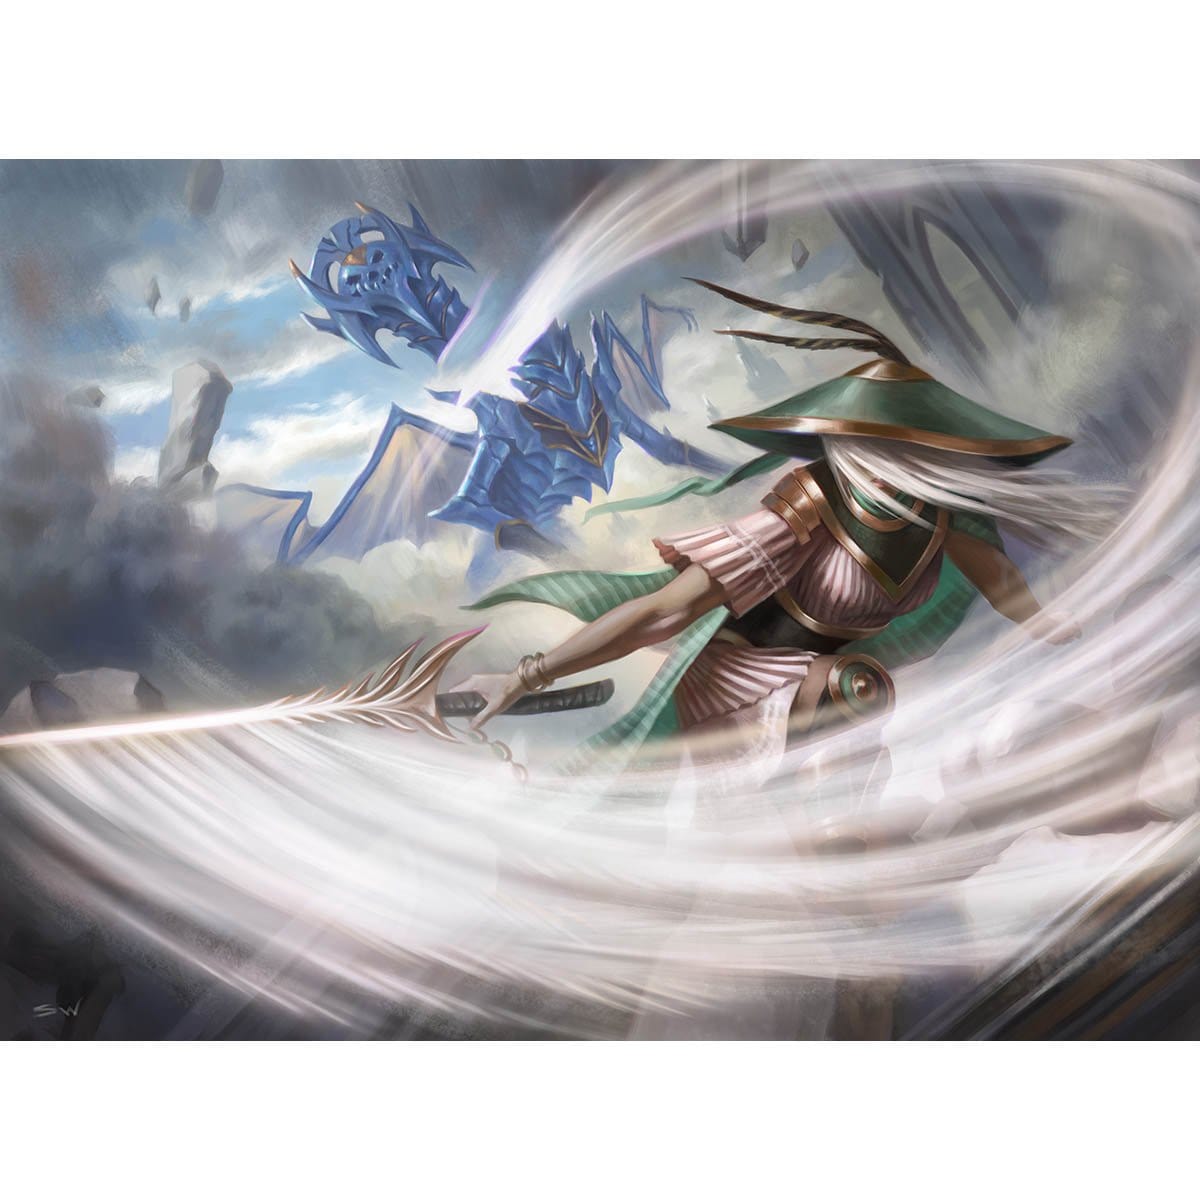 Wanderer's Strike Print - Print - Original Magic Art - Accessories for Magic the Gathering and other card games